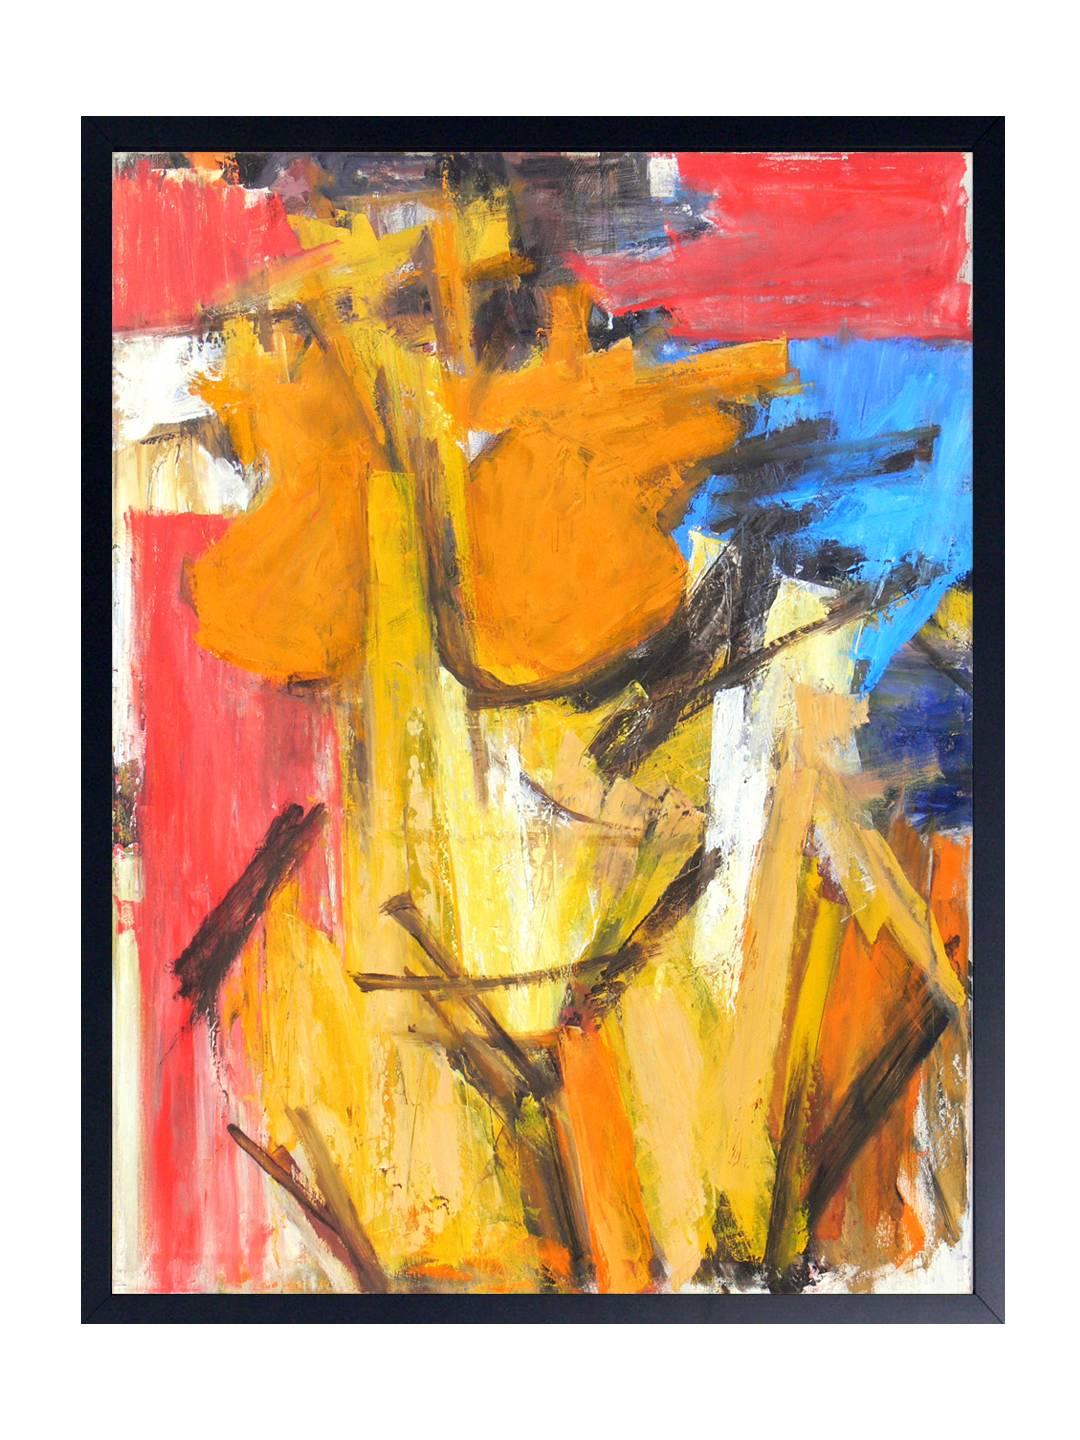 Pair of vibrant abstract figural paintings, artist unknown, American, circa 1970s. Thick impasto texture and vibrant colors. Professionally framed in clean lined black lacquered gallery frames. The painting pictured on the left measures 43.5